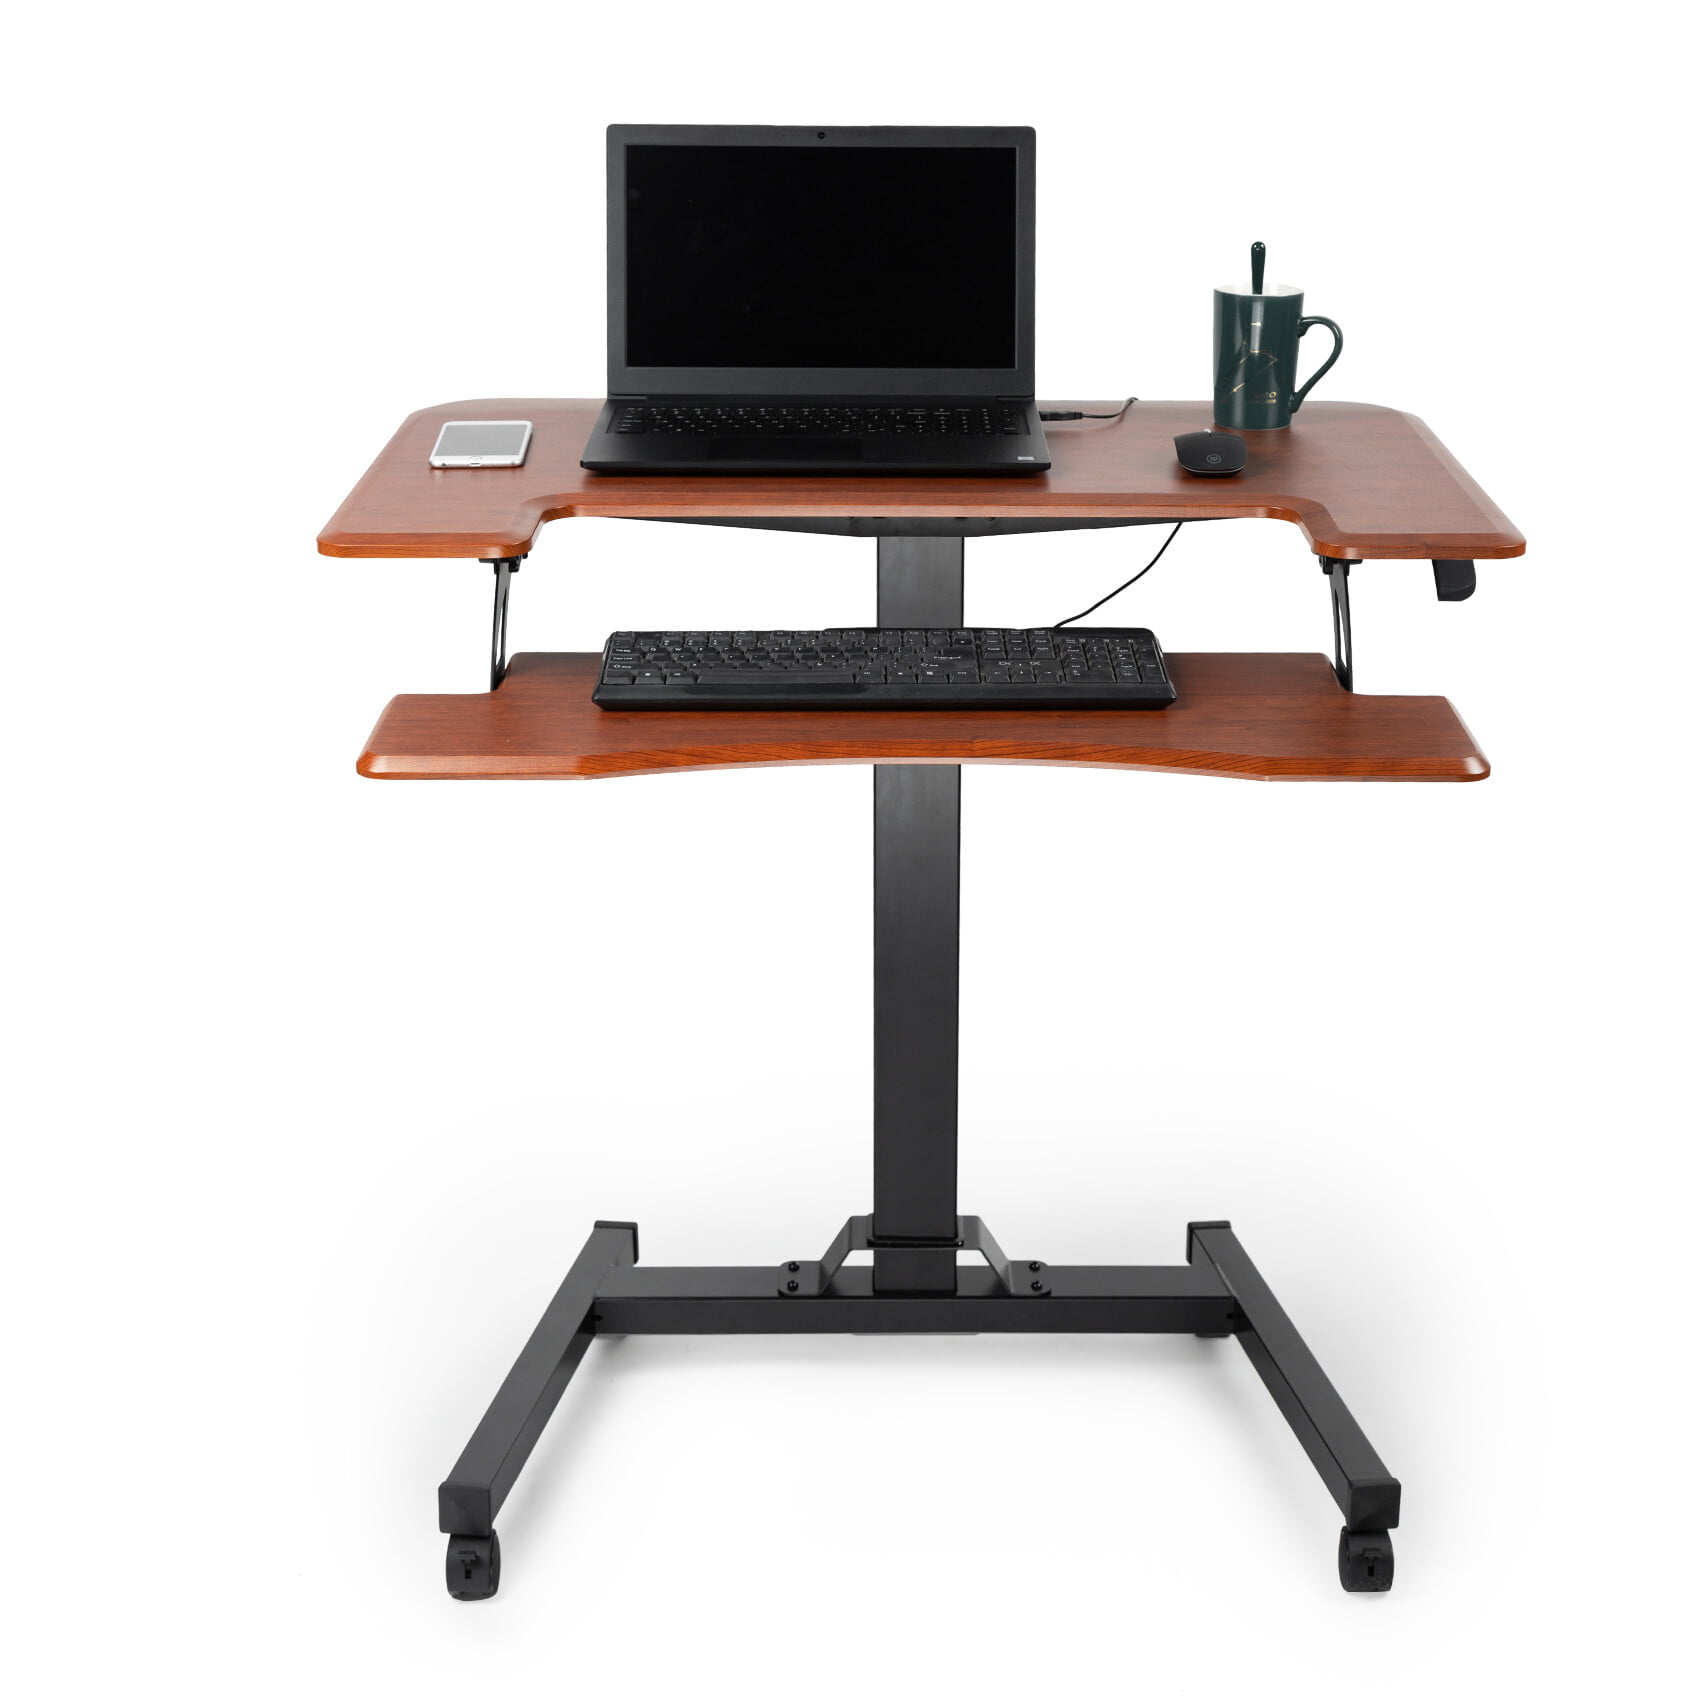 Details about   Adjustable Height Stand Up Laptop Table Lift Computer Desk Workstation w/ Wheels 